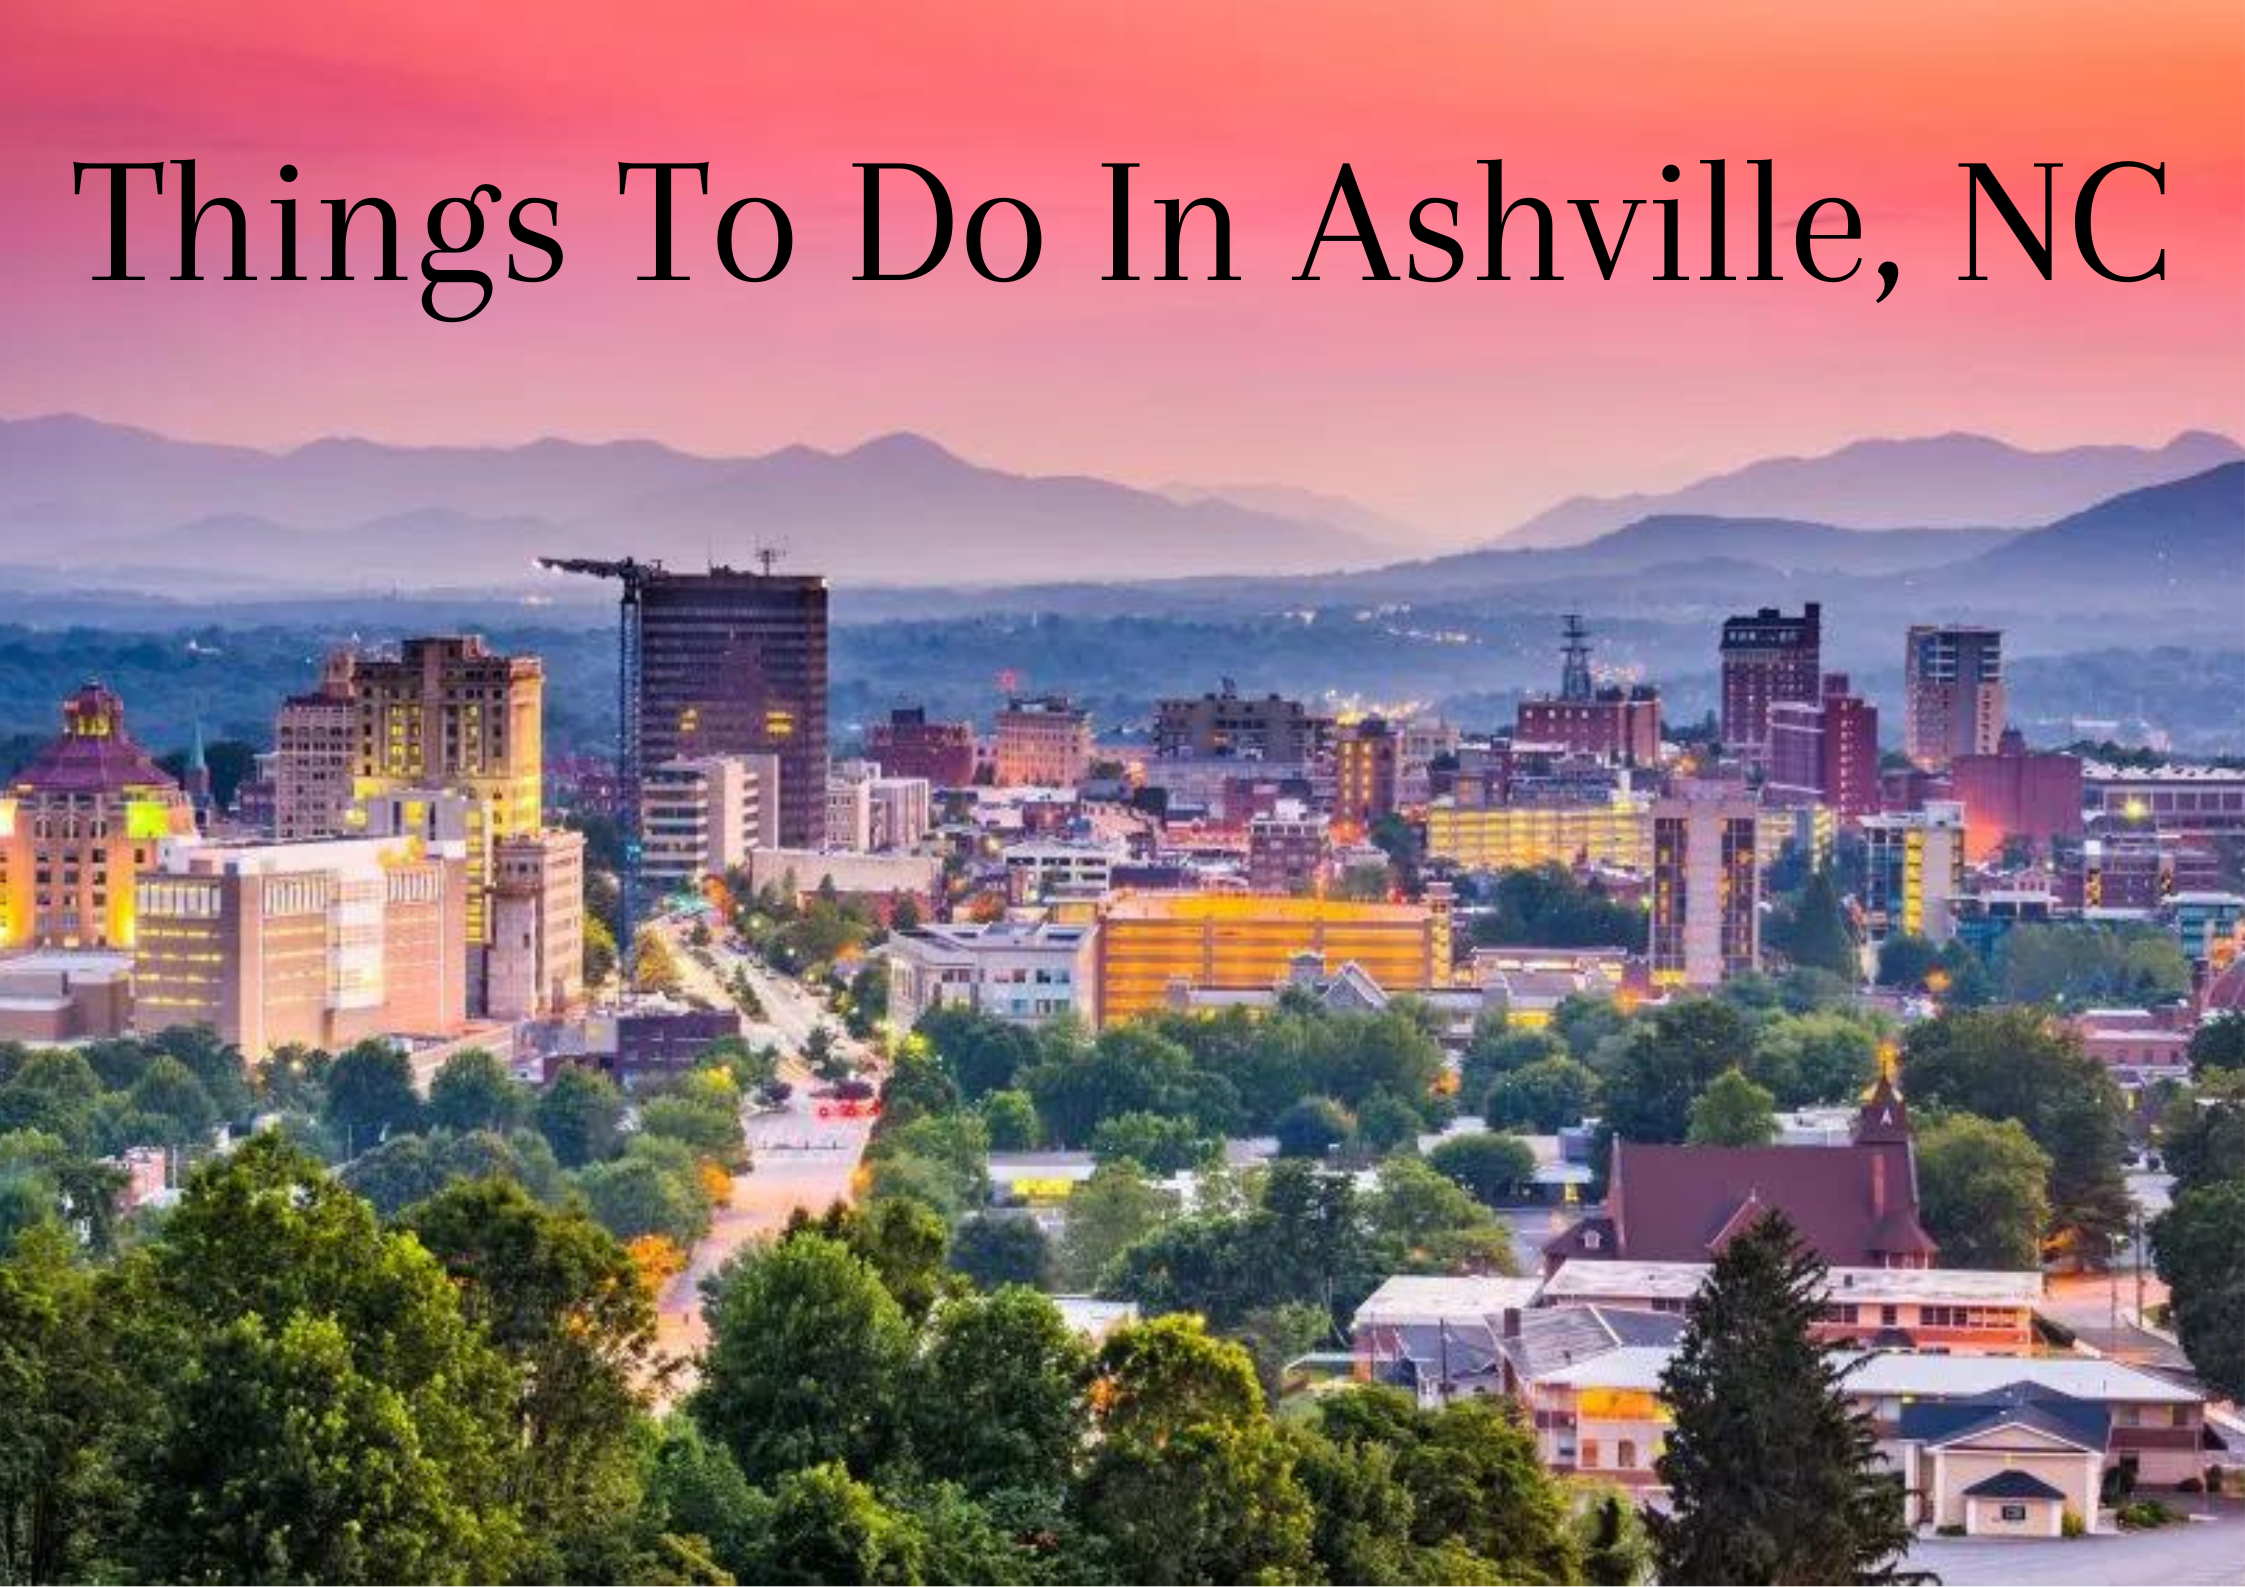 Things To Do In Ashville, NC